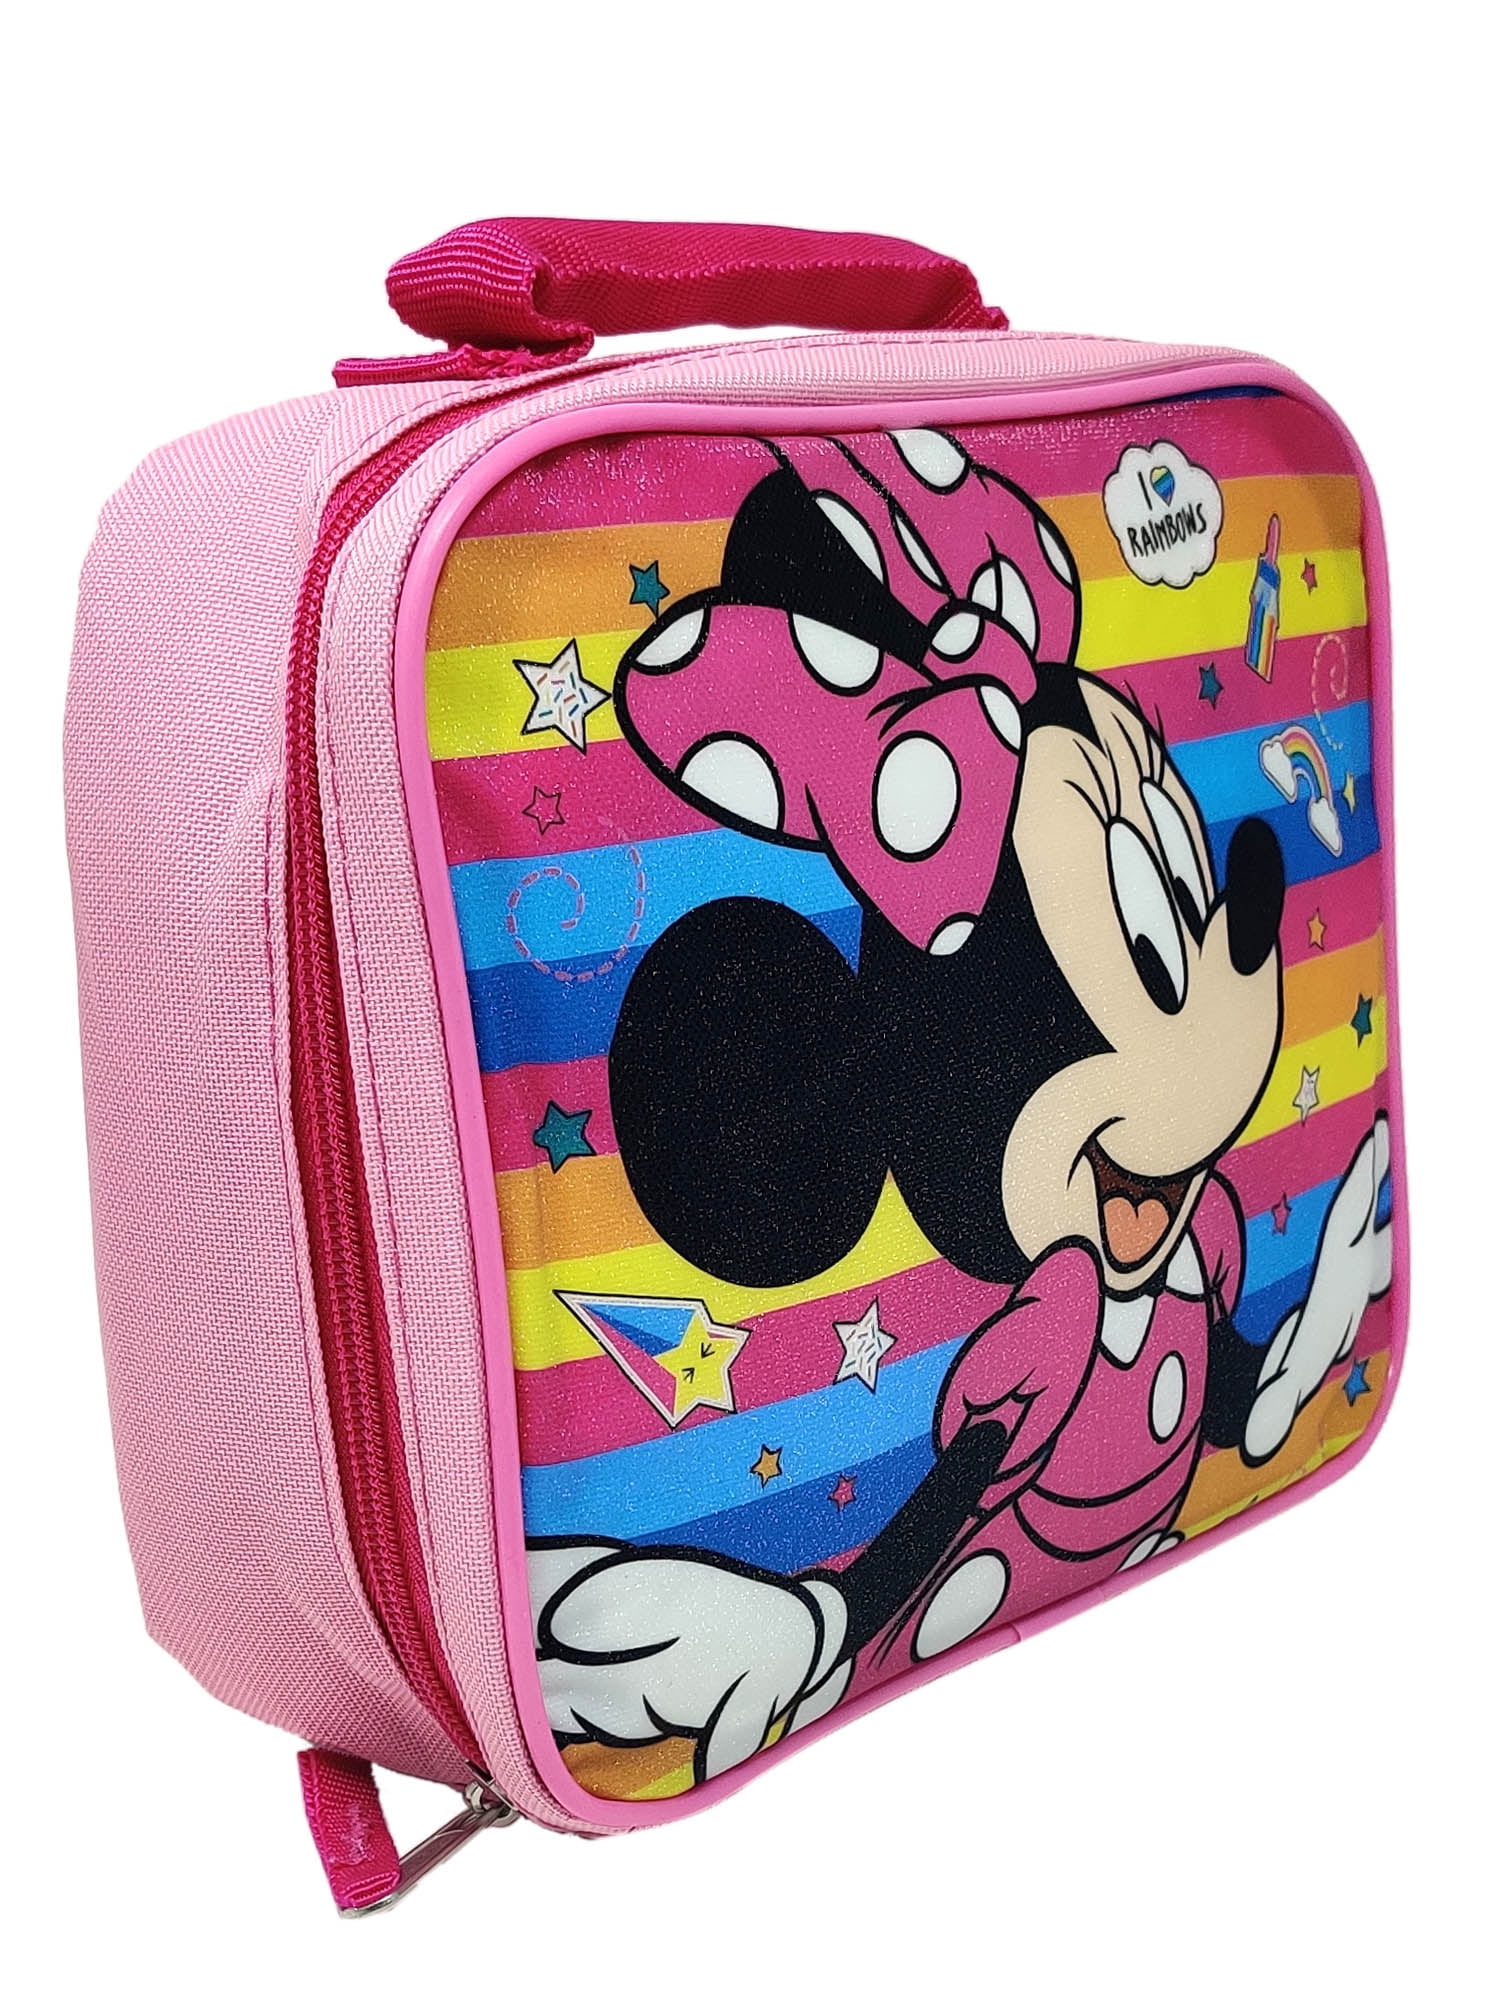 Minnie Mouse Lunch Bag Insulated Disney Smiles Bows Girls Pink School  Daycare